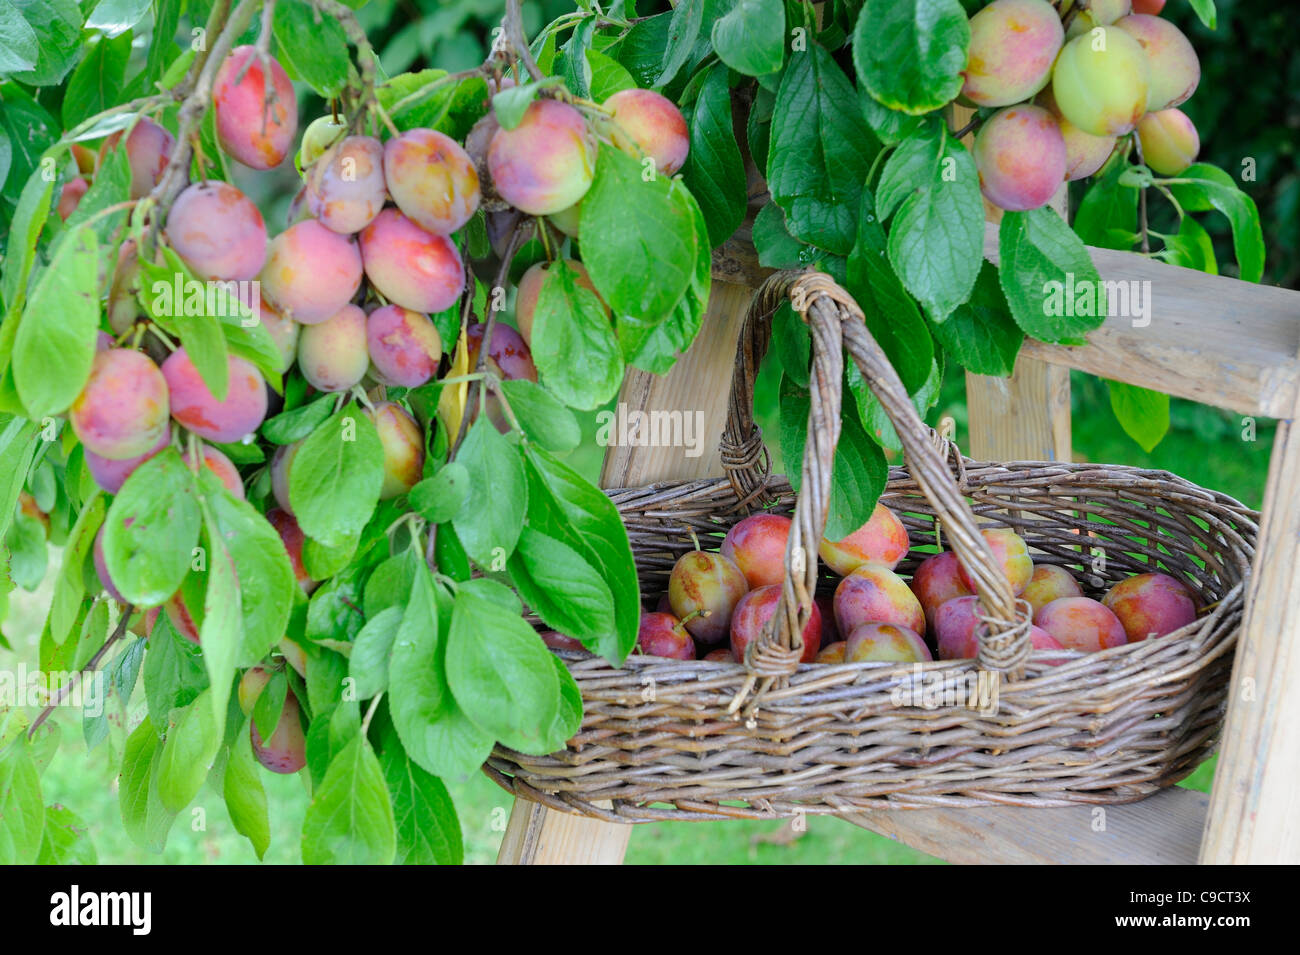 Victoria plum tree with ripe fruit in basket and step ladder, UK, August Stock Photo